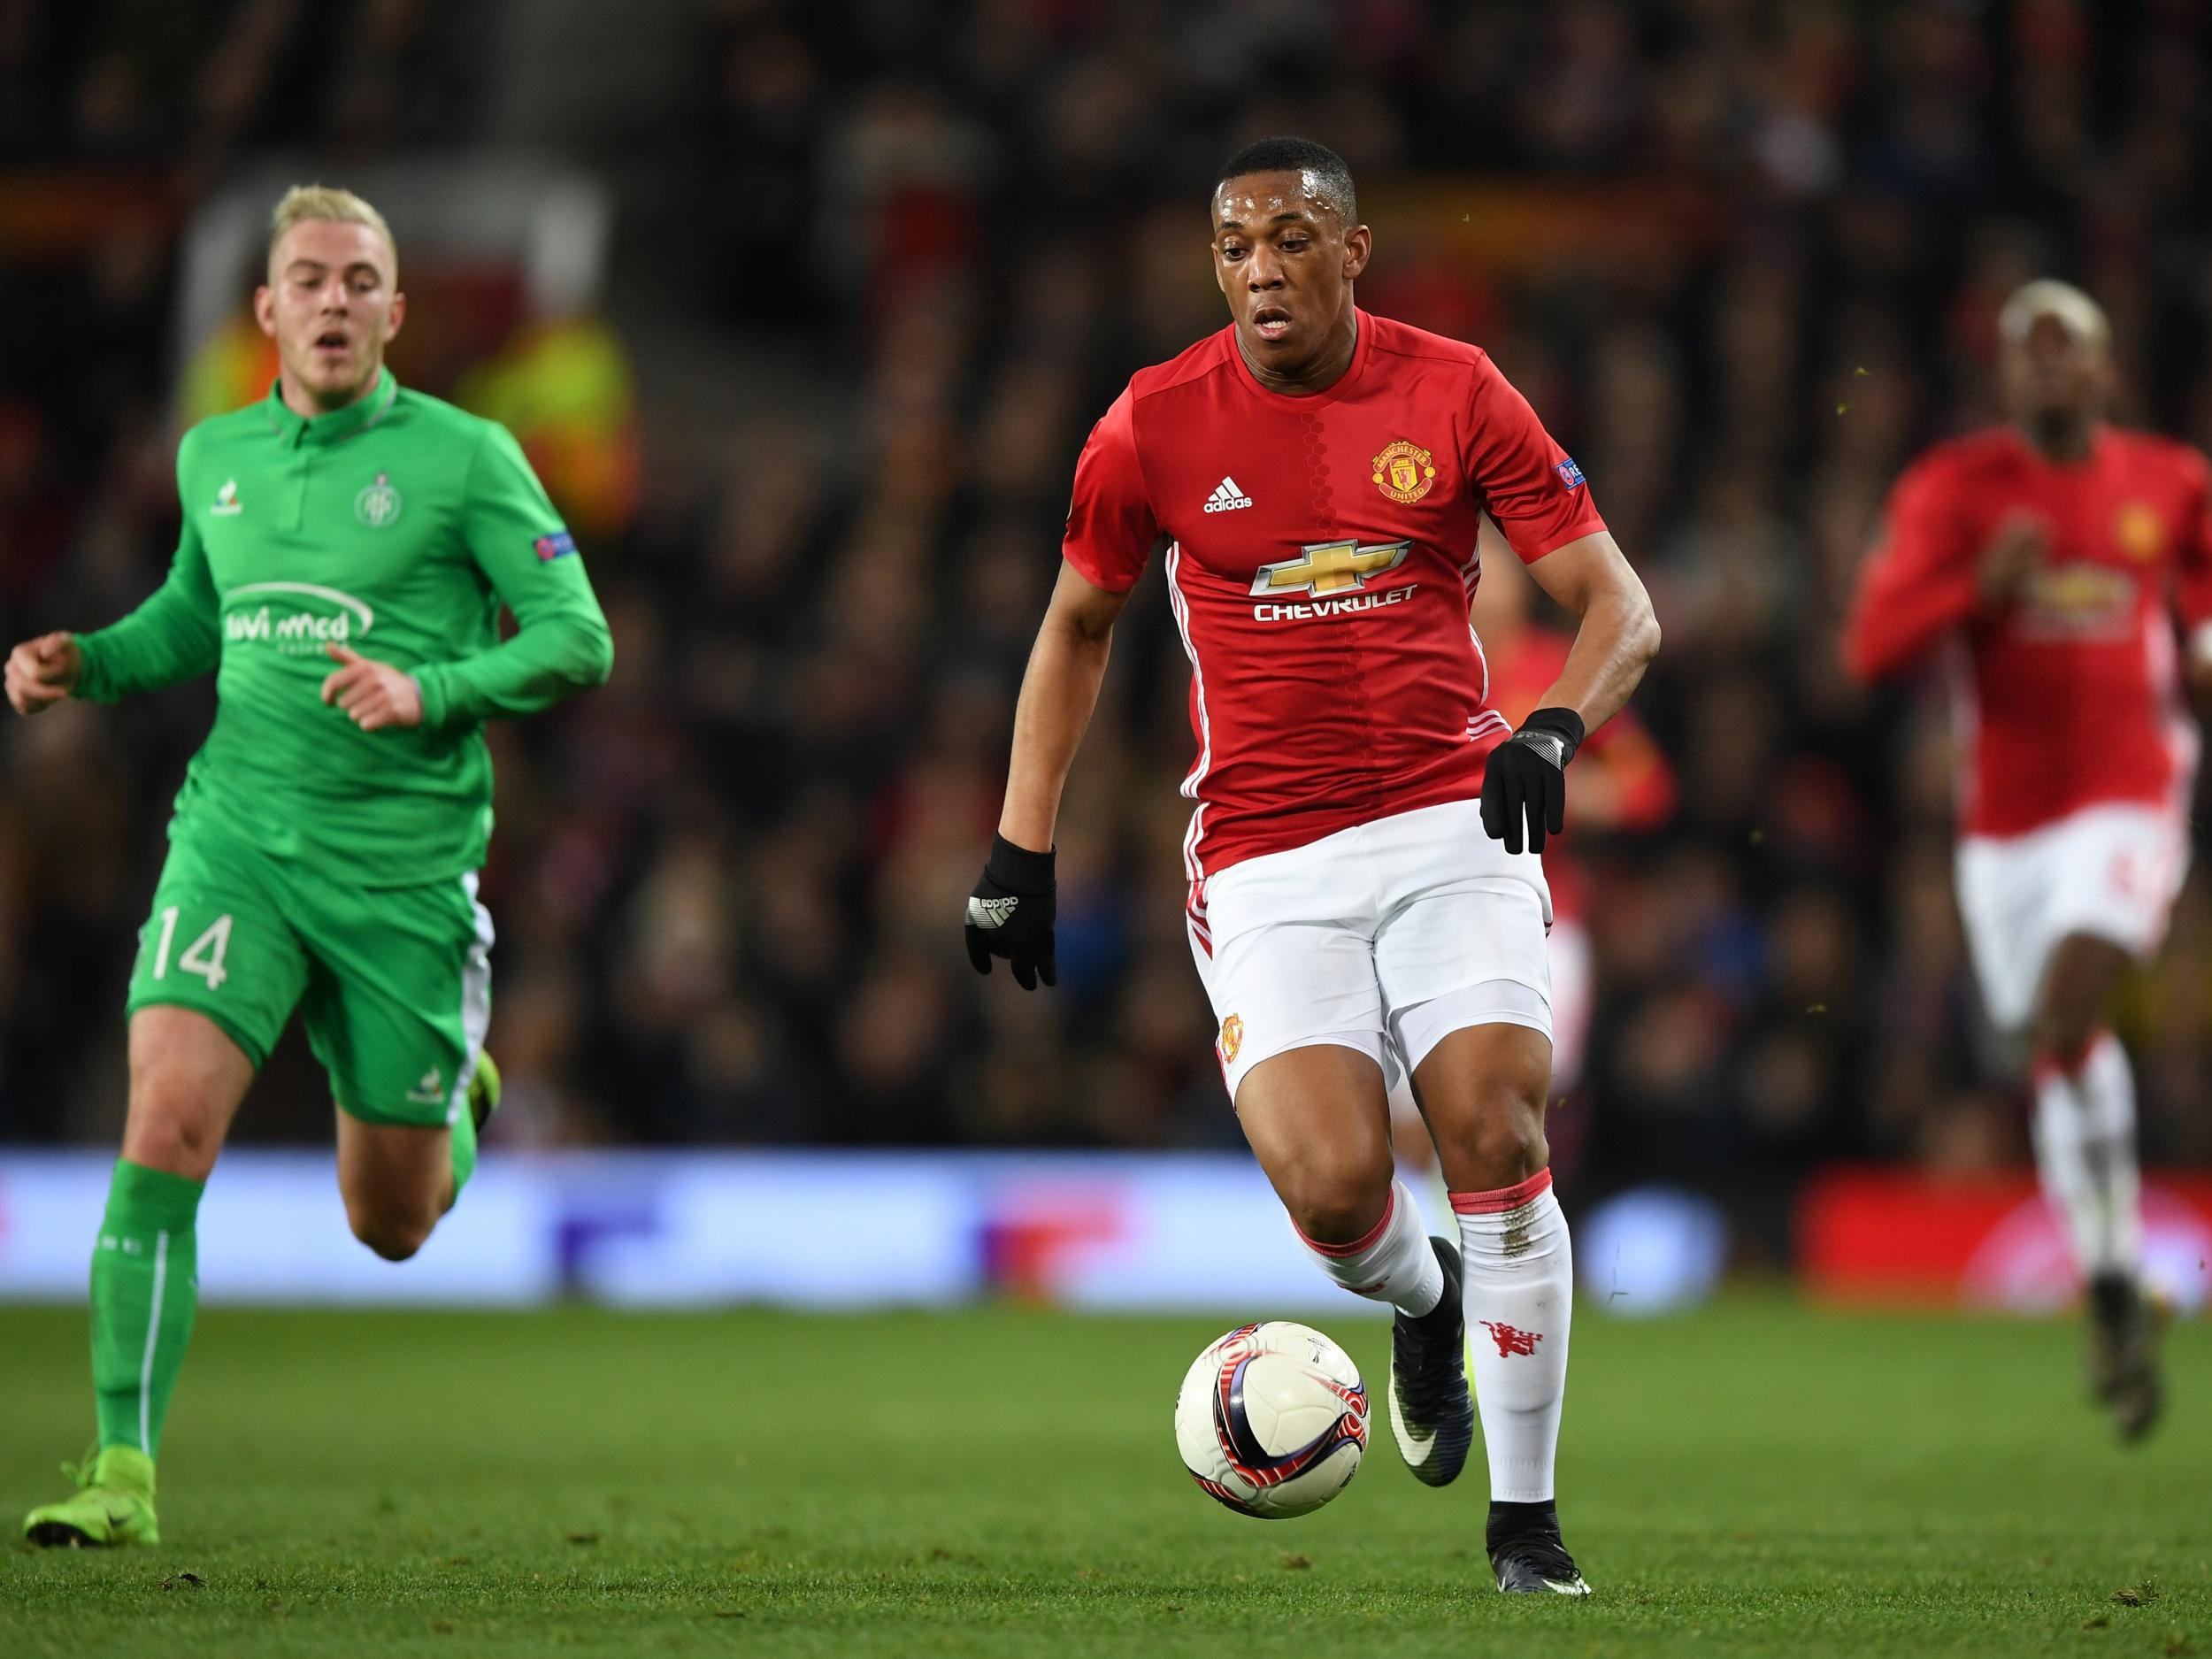 Martial was a constant threat down the left